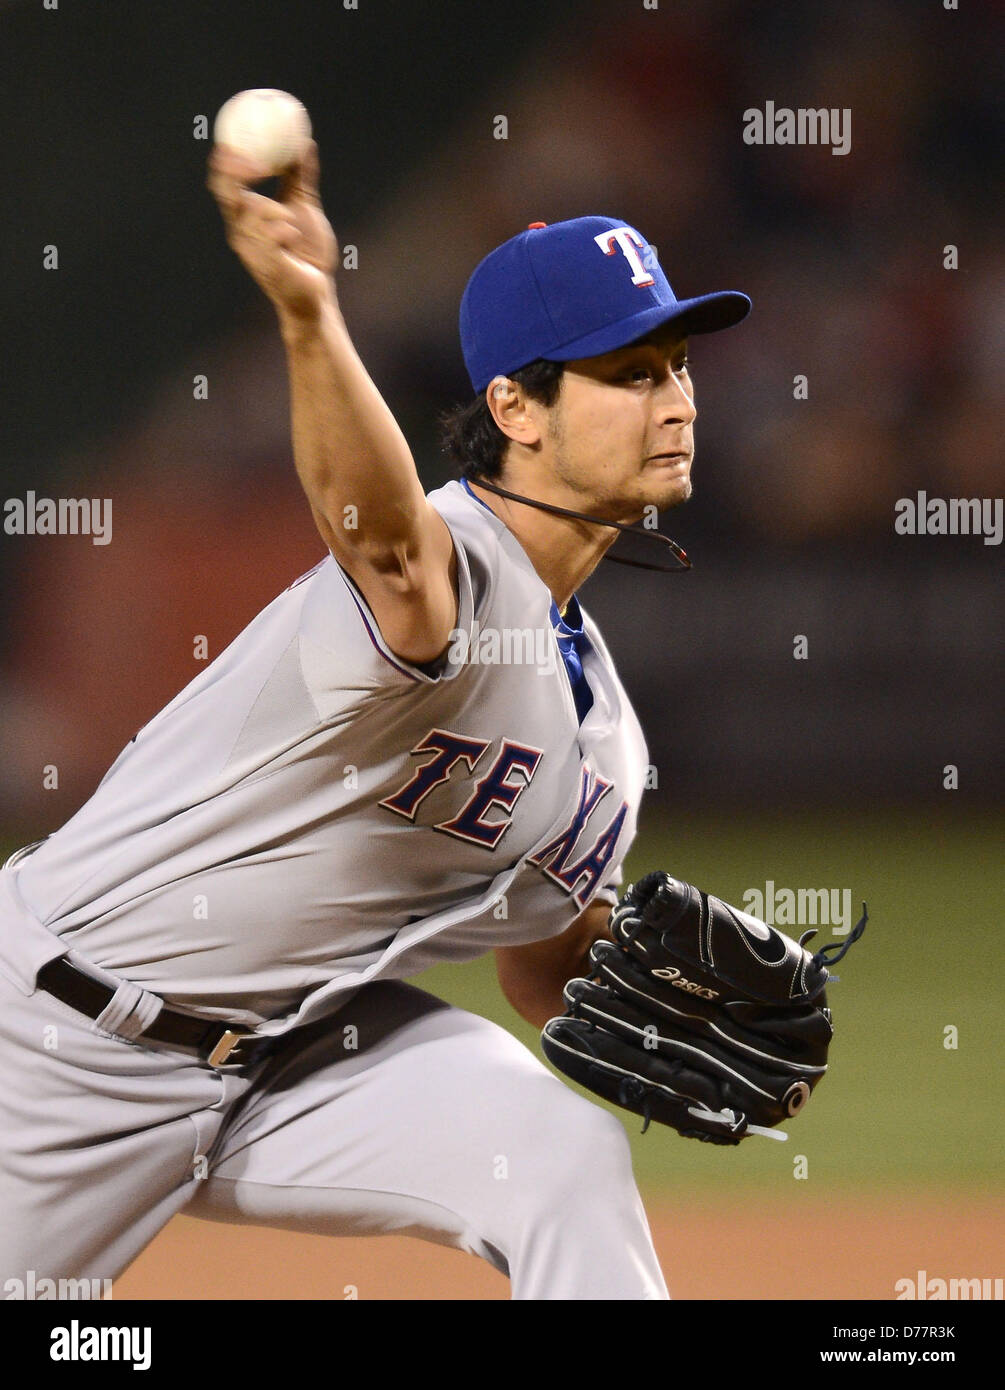 Yu Darvish (Rangers), APRIL 24, 2013 - MLB : Yu Darvish of the Texas Rangers pitches during the baseball game against the Los Angeles Angels at Angel Stadium in Anaheim, California, United States. (Photo by AFLO) Stock Photo